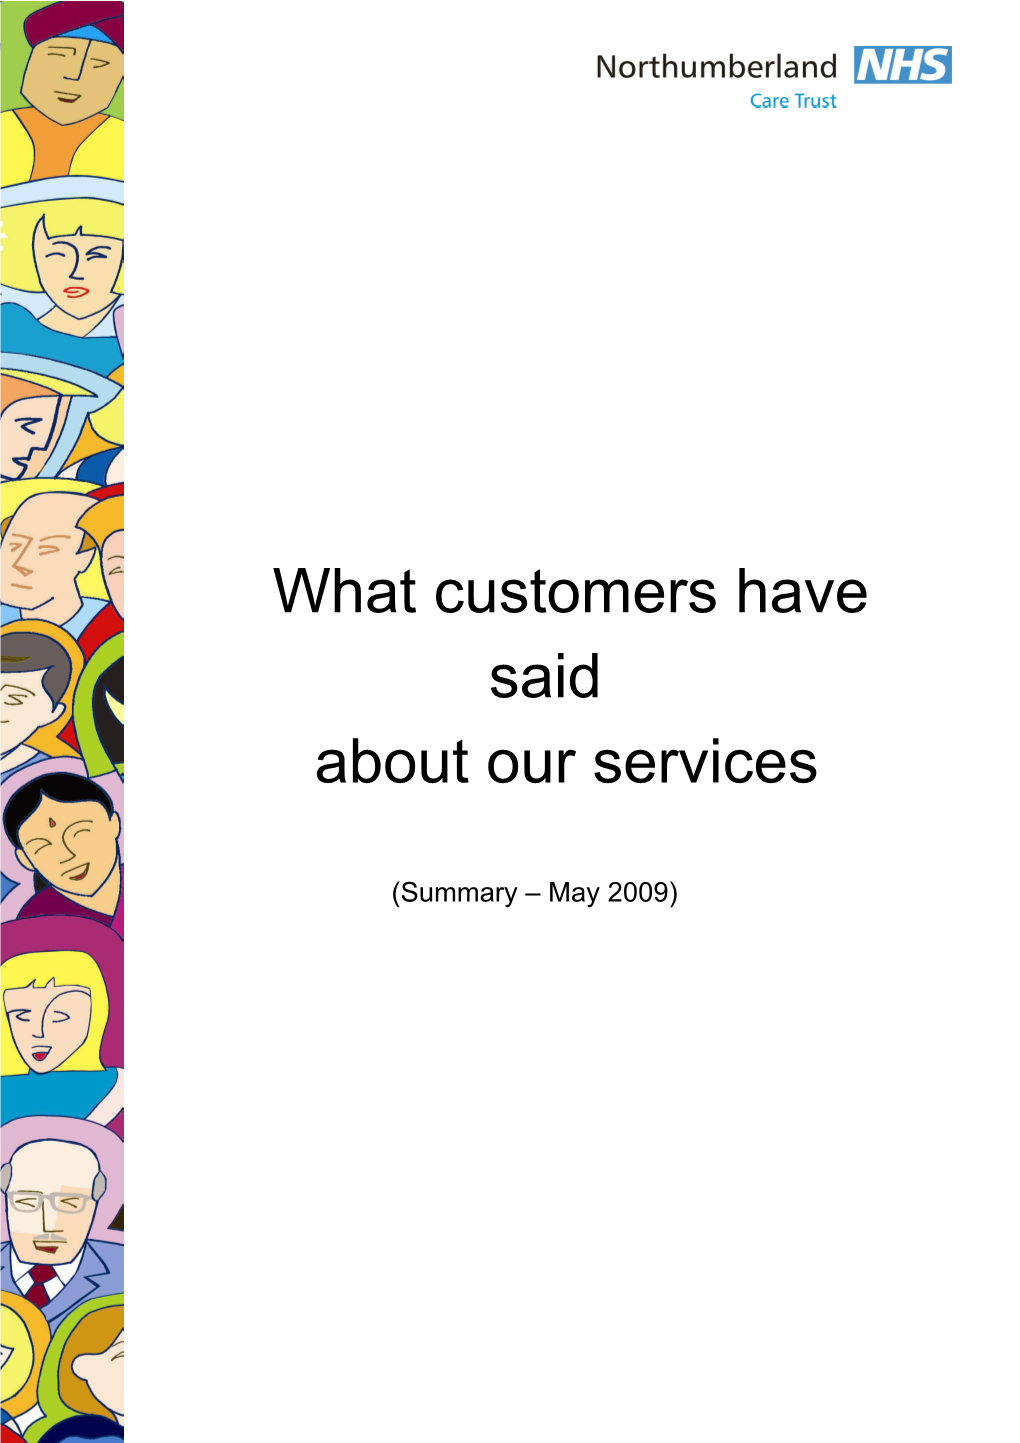 How Do We Gather the Views of Our Customers?